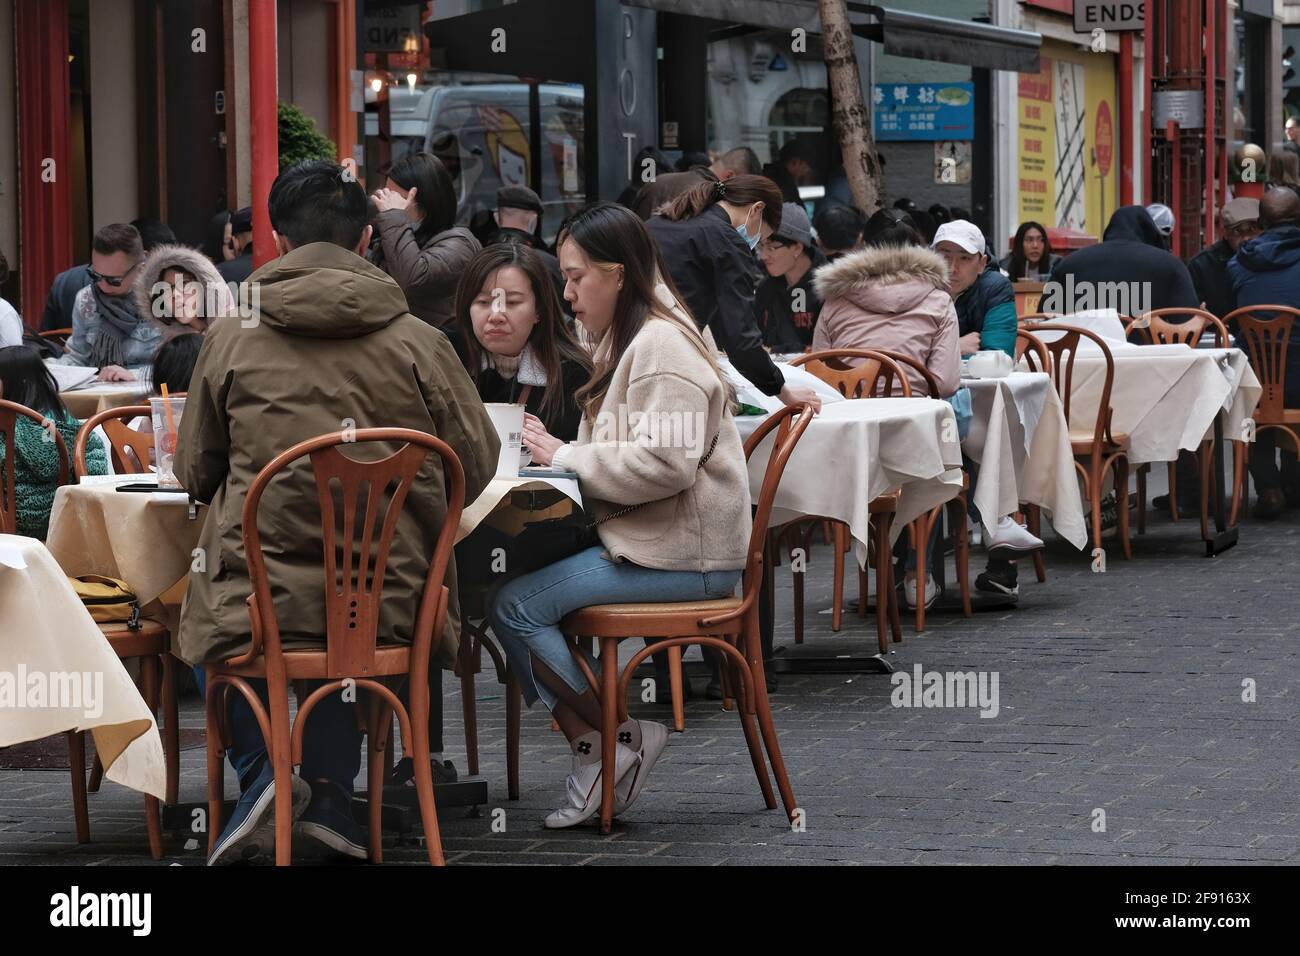 Diners in London's Chinatown enjoy a meal out on the first day outdoor hospitality returns as Covid restrictions are further eased in England Stock Photo